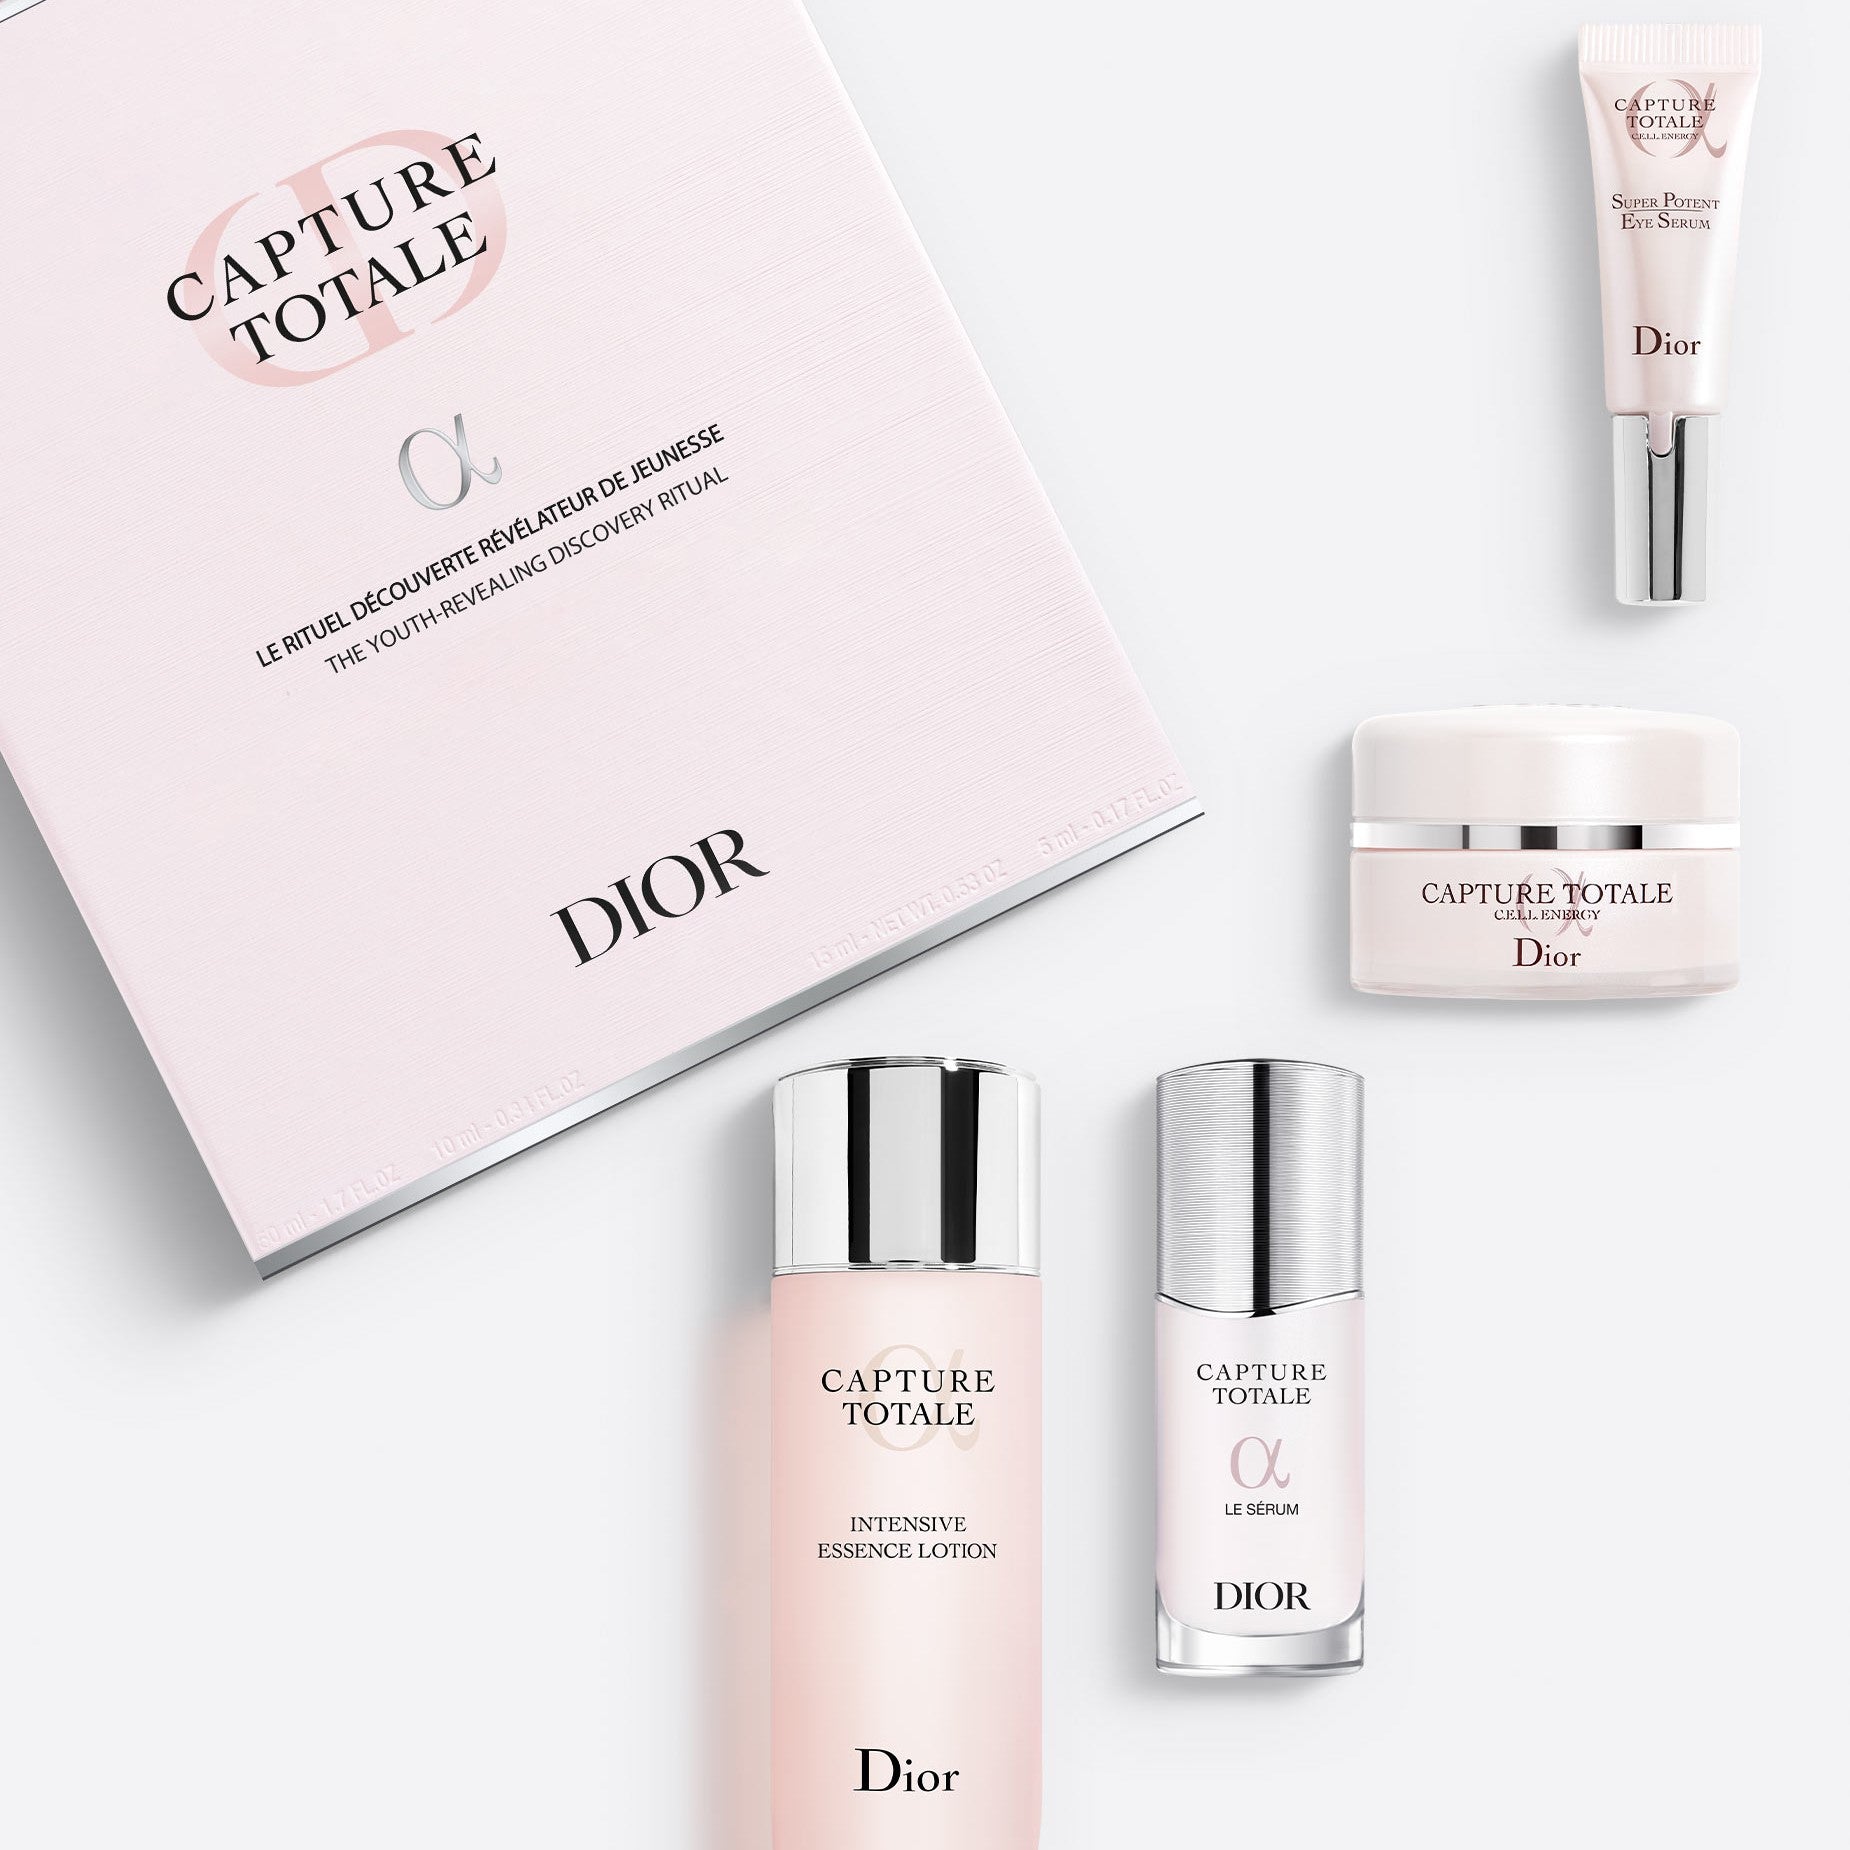 CAPTURE TOTALE DISCOVERY SET | The Youth-Revealing Discovery Ritual - Selection of 4 Firming Skincare Products